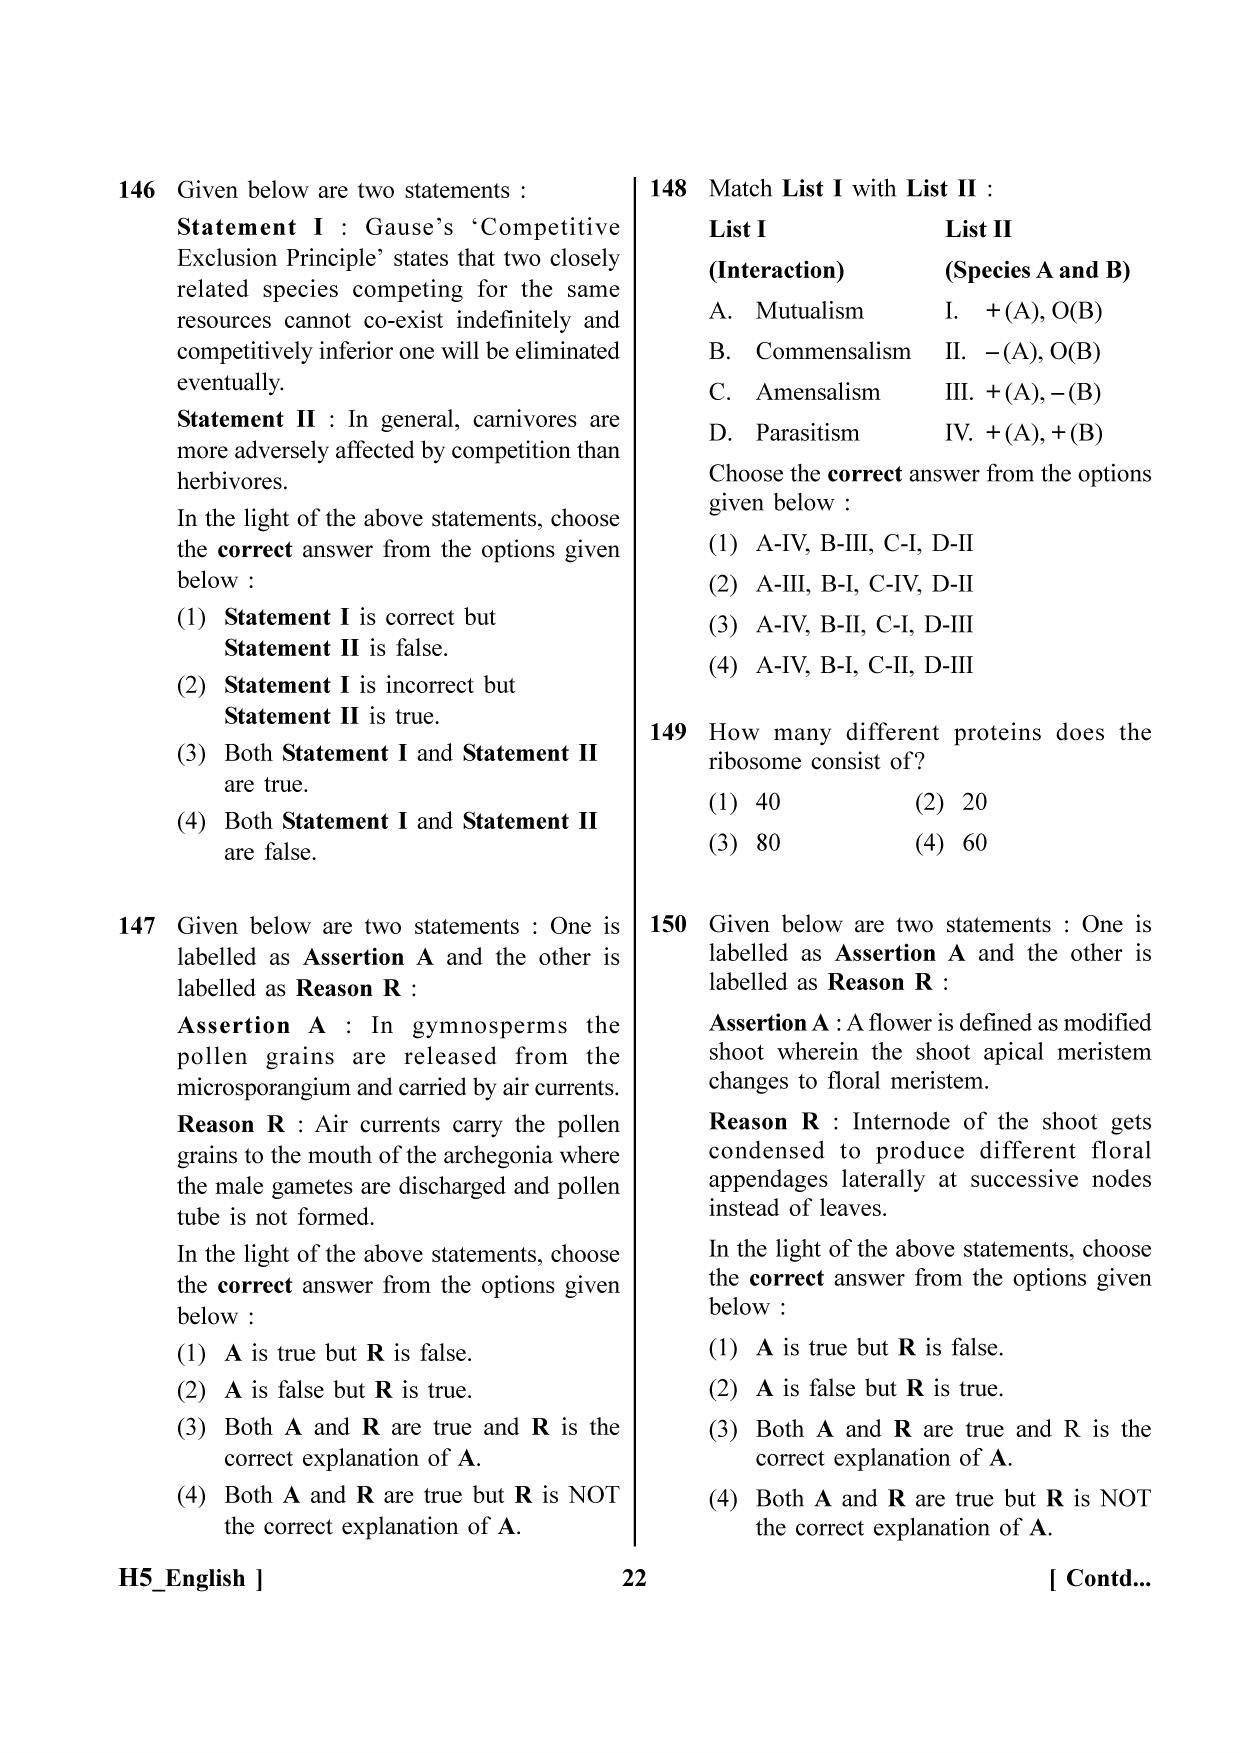 NEET 2023 H5 Question Paper - Page 22